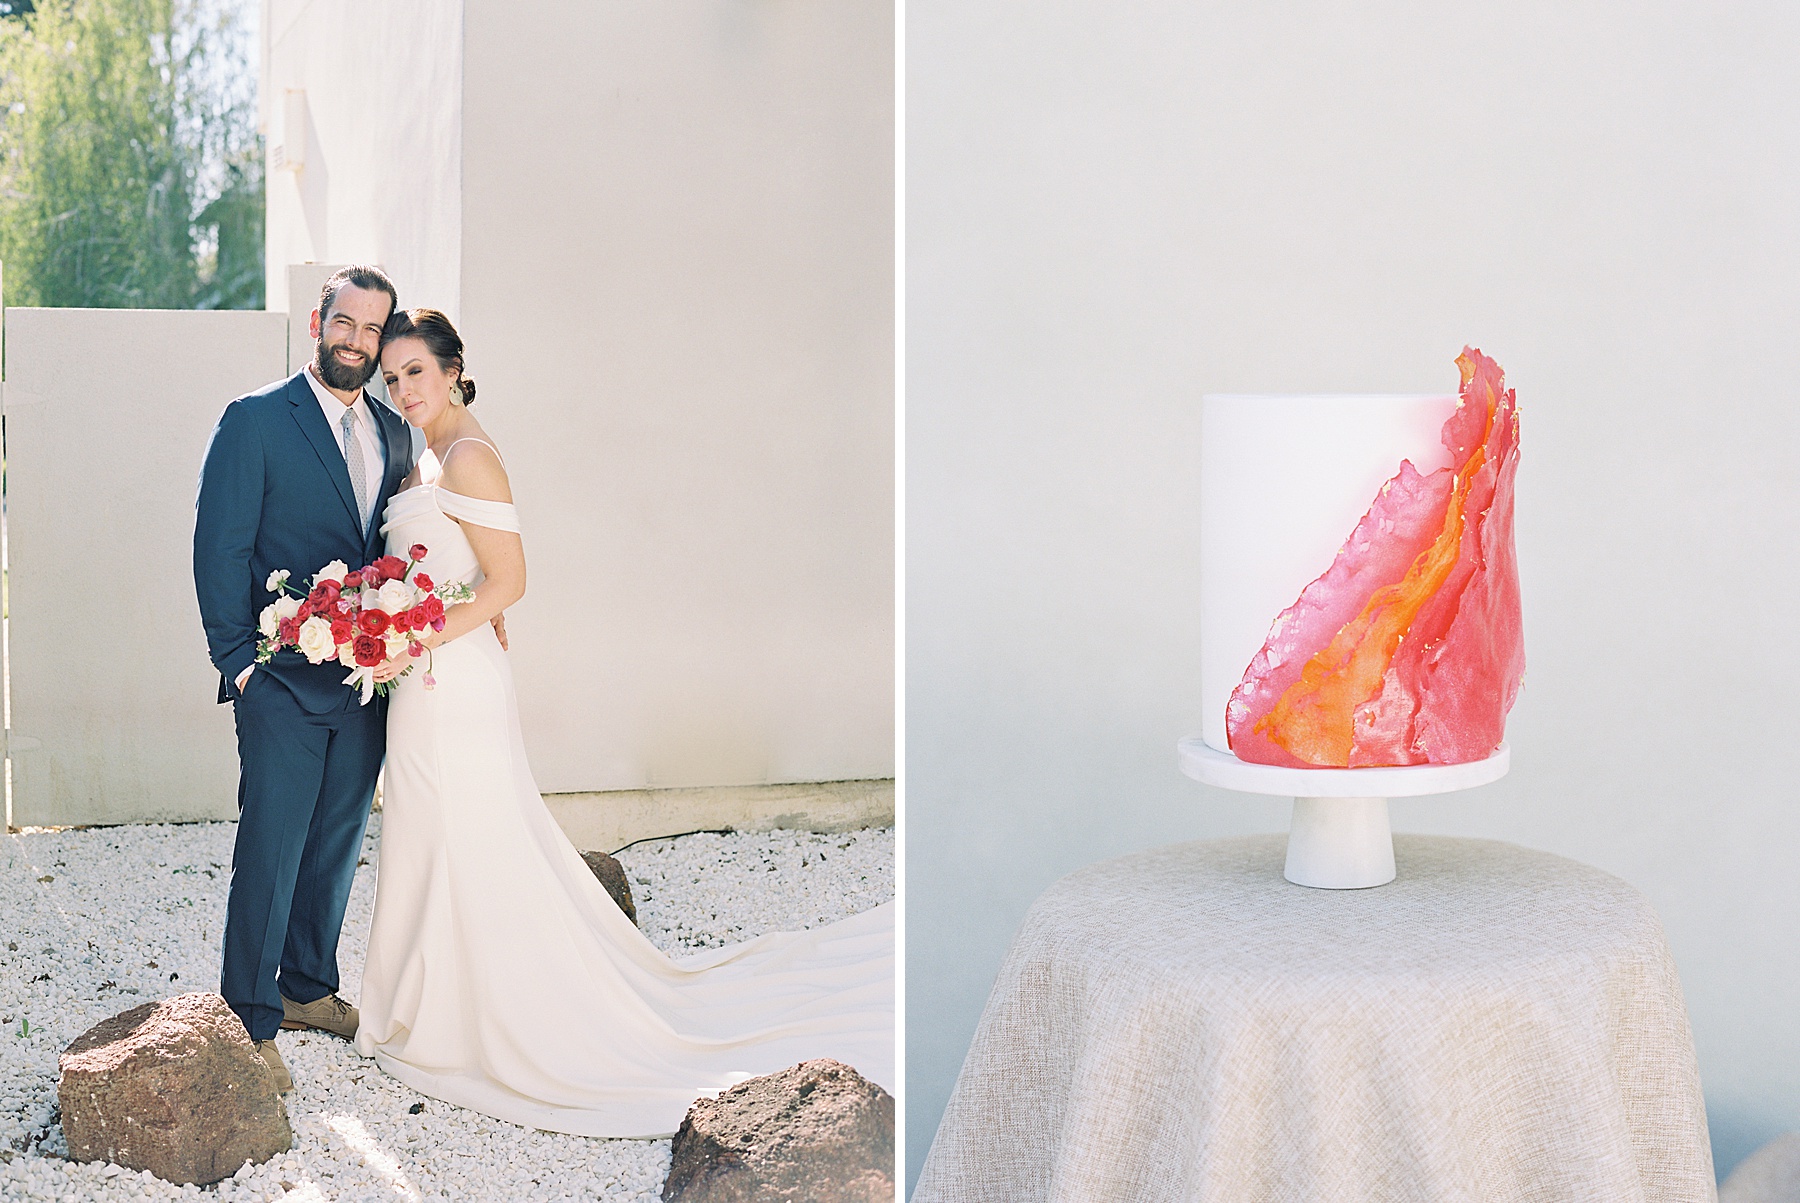 Grecian Inspired Micro-Wedding with Events by Kristina Elyse - Ash Baumgartner - Inspired by This - Sonoma Wedding Photographer_0033.jpg